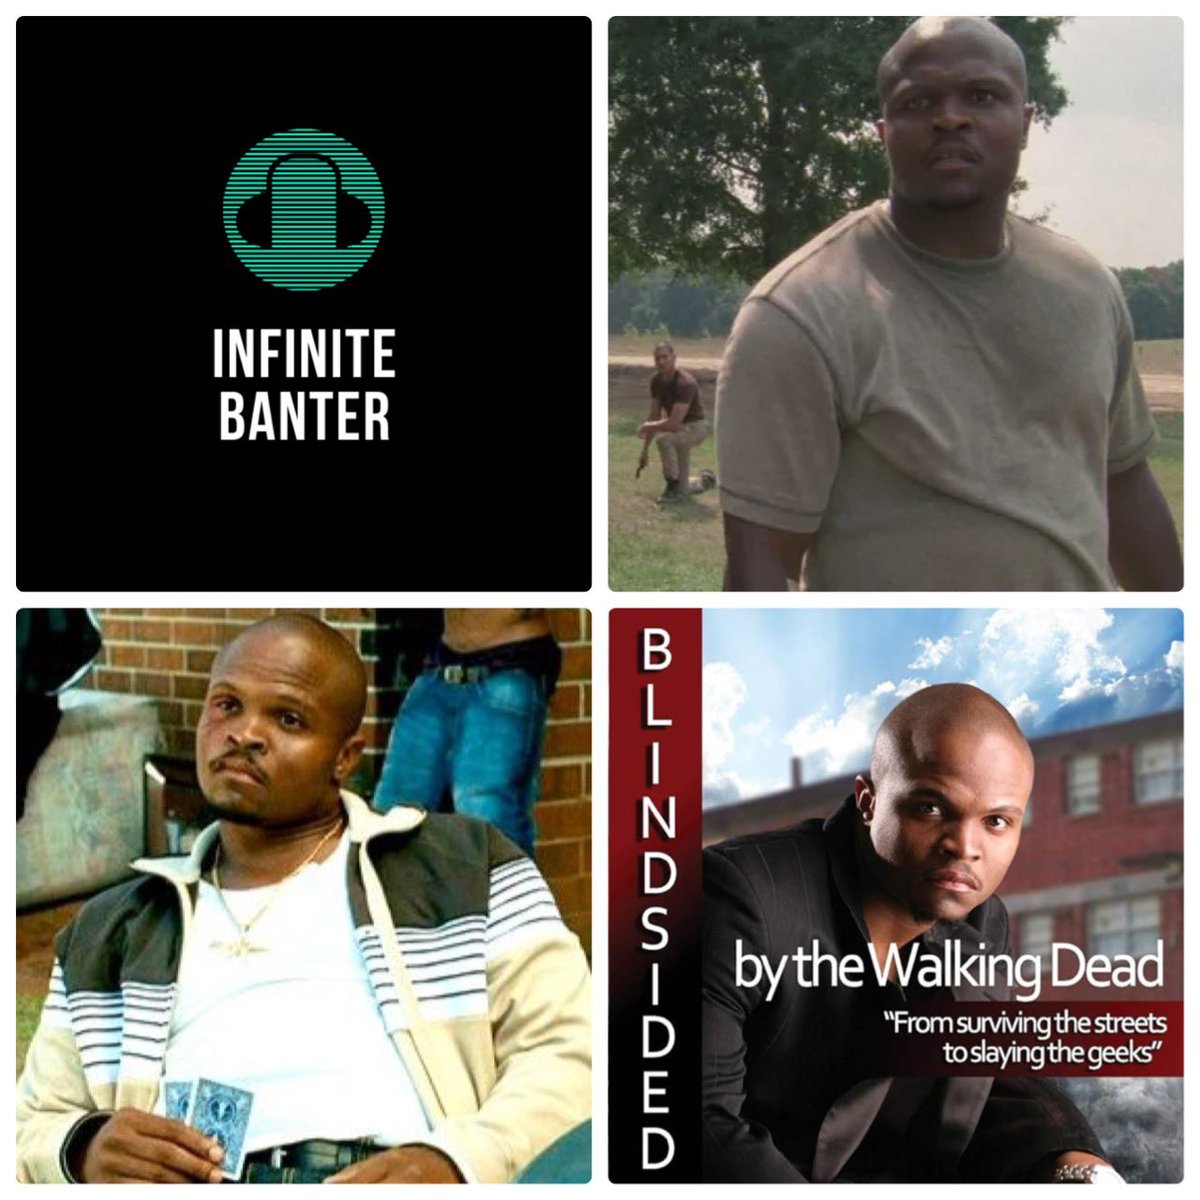 New episode hosted by @djsoundwave75 Here, Mark is joined by actor @ironesingleton who many know for his time on #TheWalkingDead playing “T- Dog”. Check out IronE Singleton at ironeproductions.com and ironesingleton.com/index.html
Listen on all platforms or link in bio.